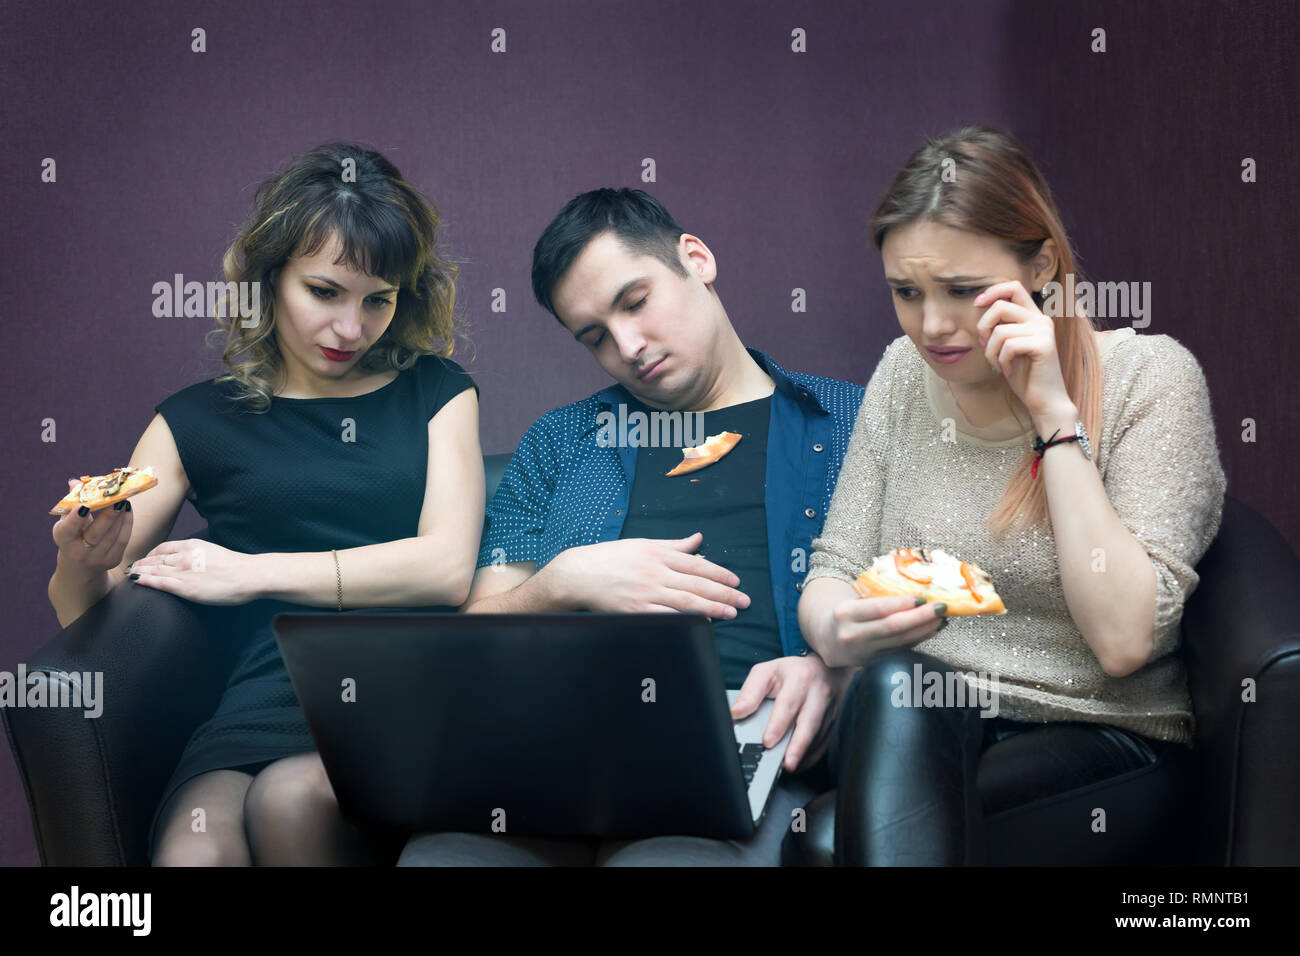 The girls watch a television series and the man fell asleep from boredom. Stock Photo